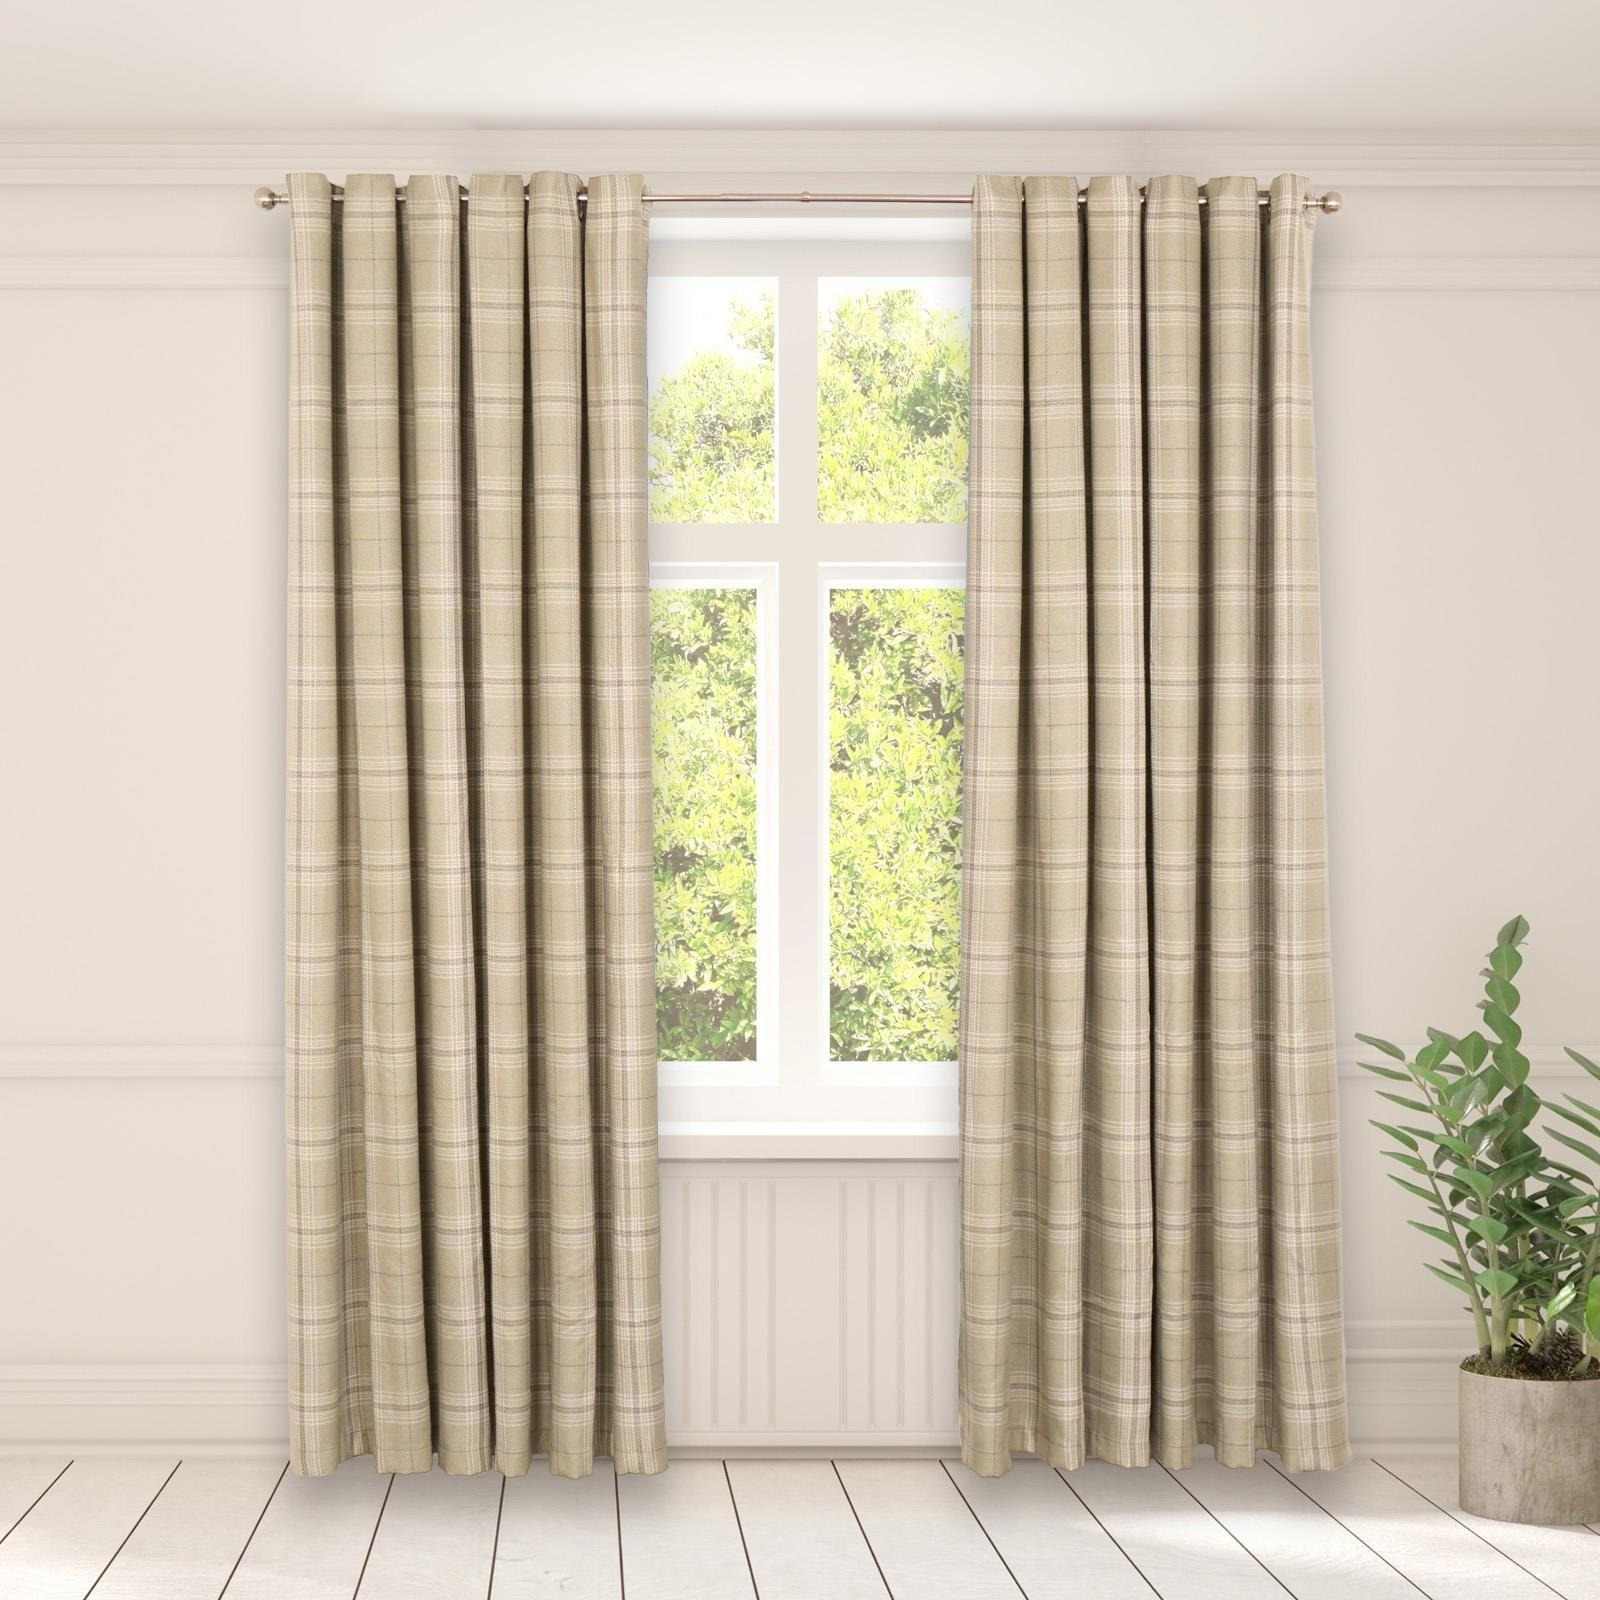 Pair Of Woven Check Eyelet Curtains Blackout Textured - image 1